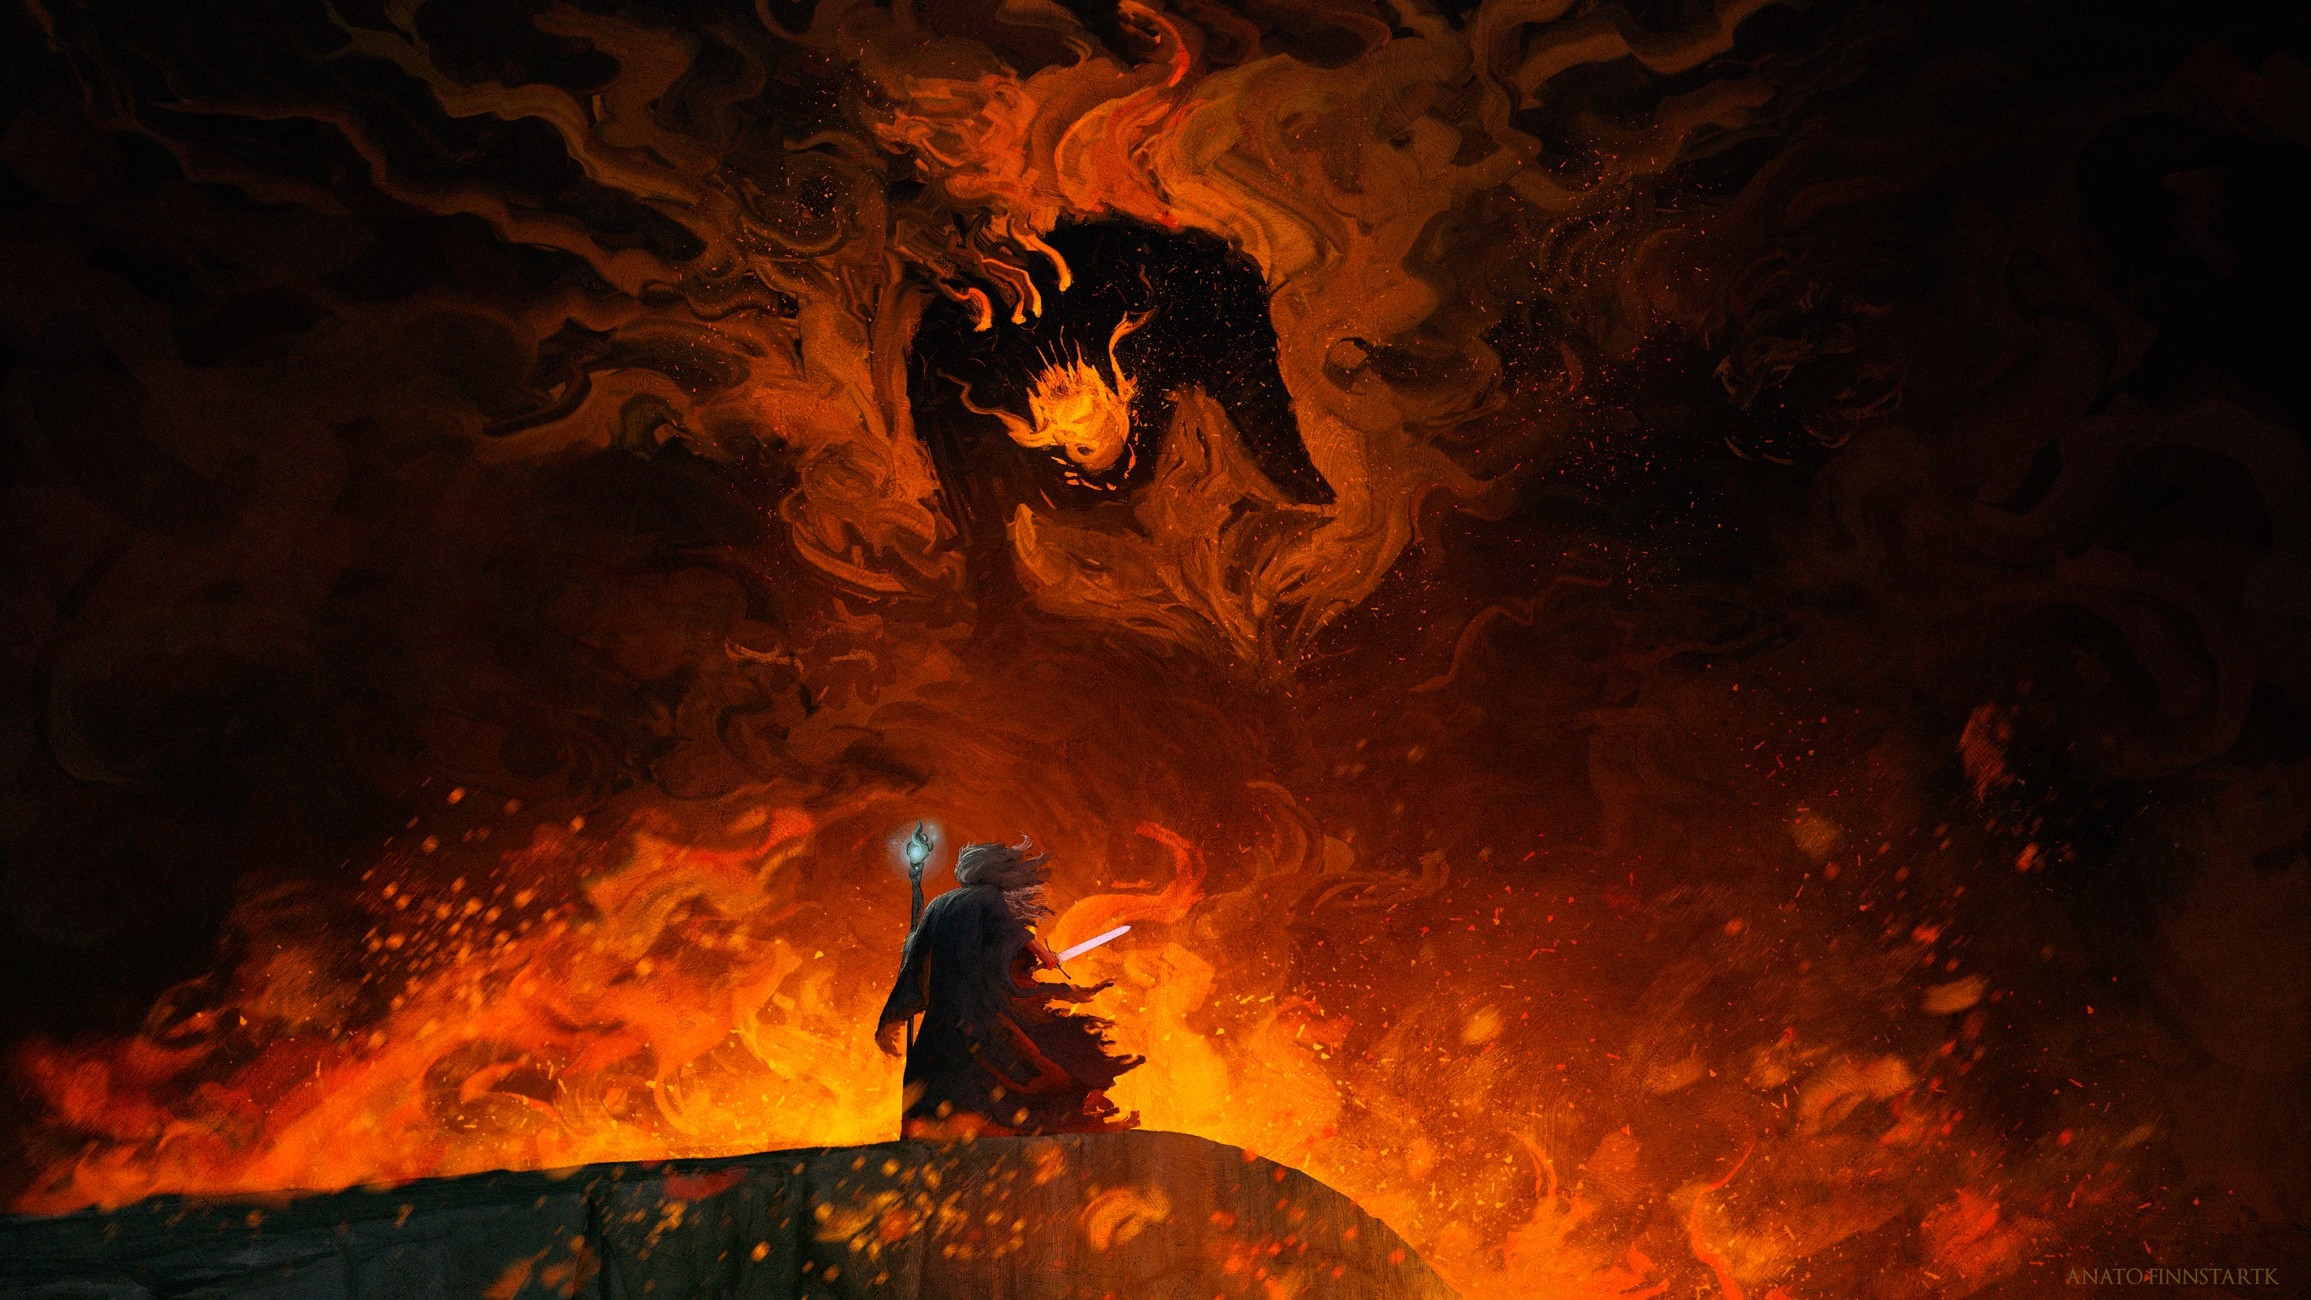 700x700 Balrog vs Gandalf Lord Of The Rings 700x700 Resolution ...